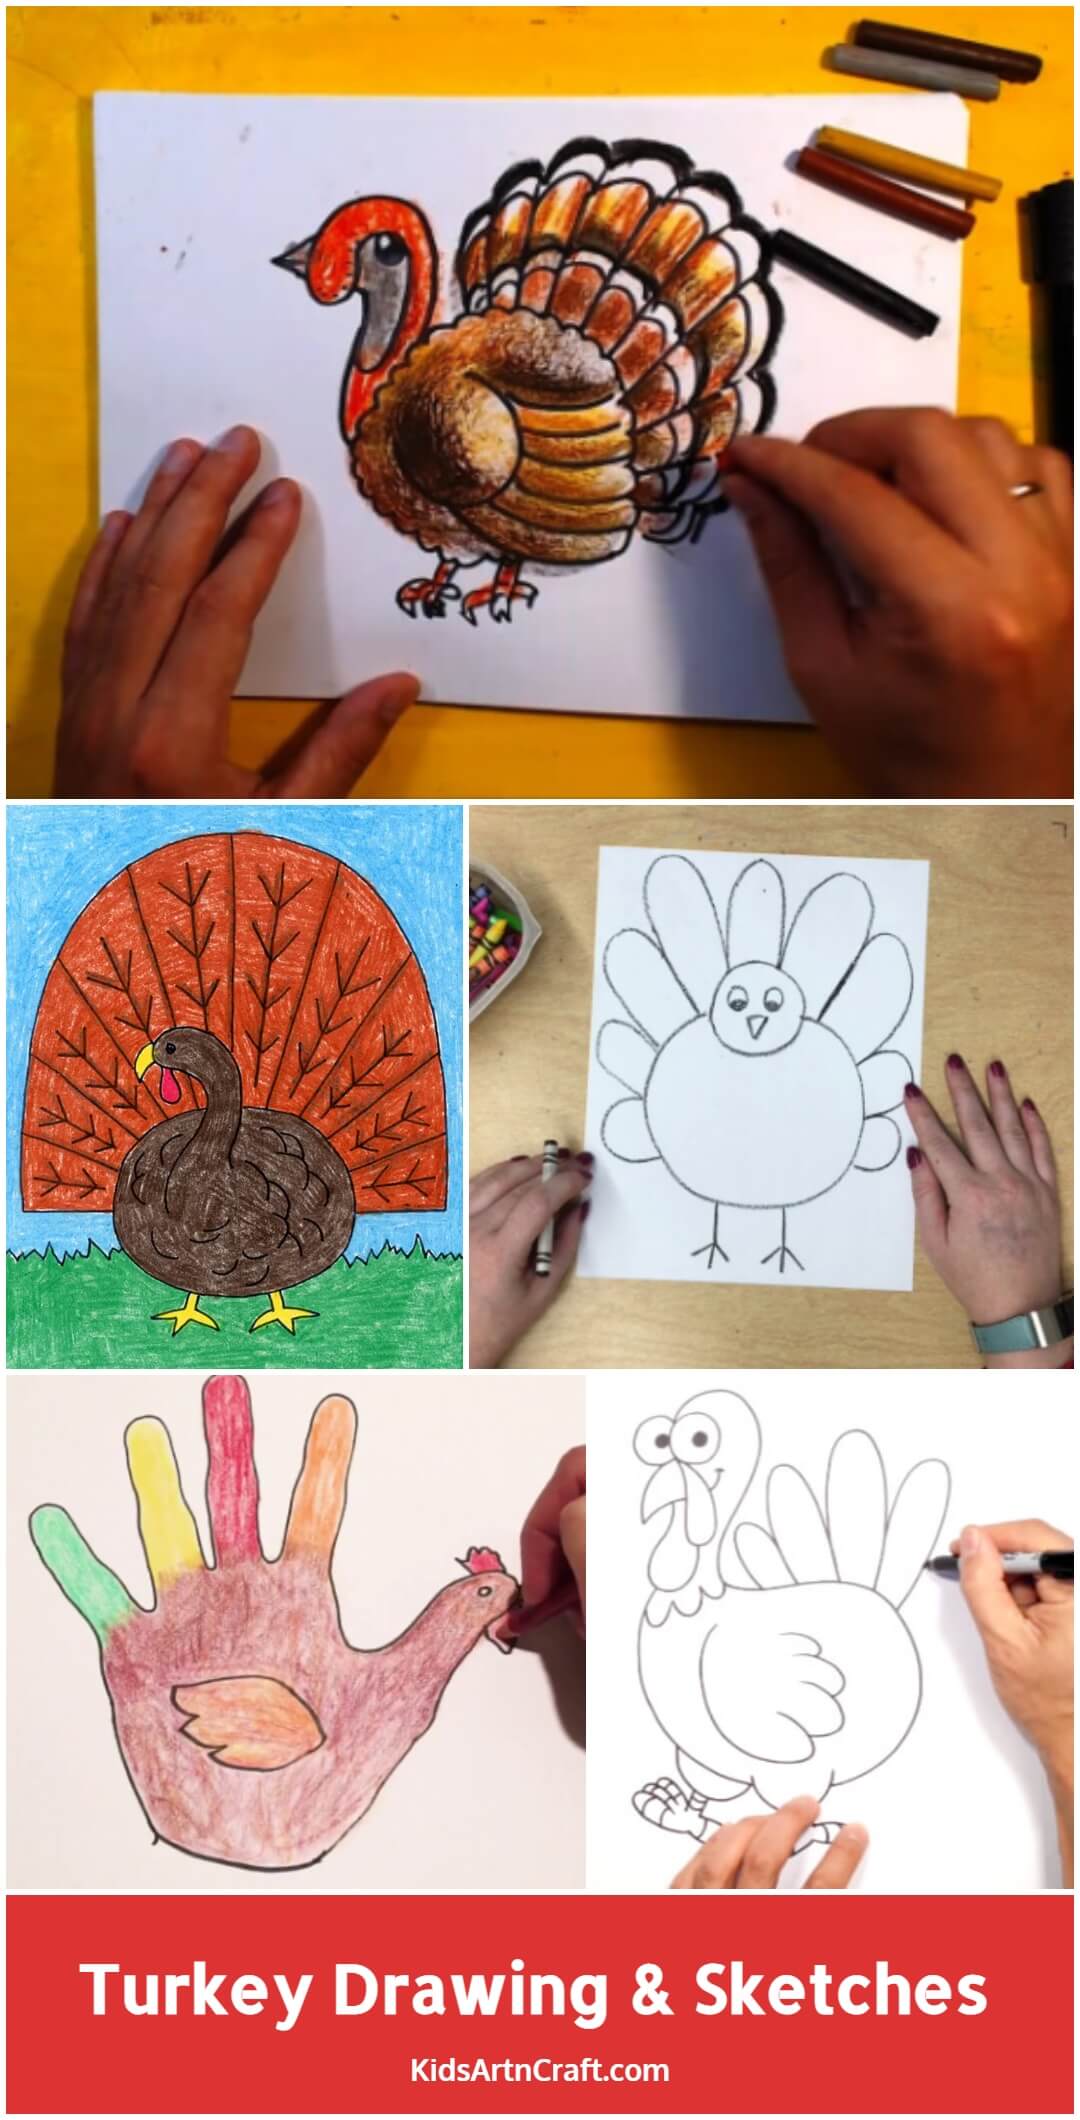 Turkey Drawing & Sketches For Kids